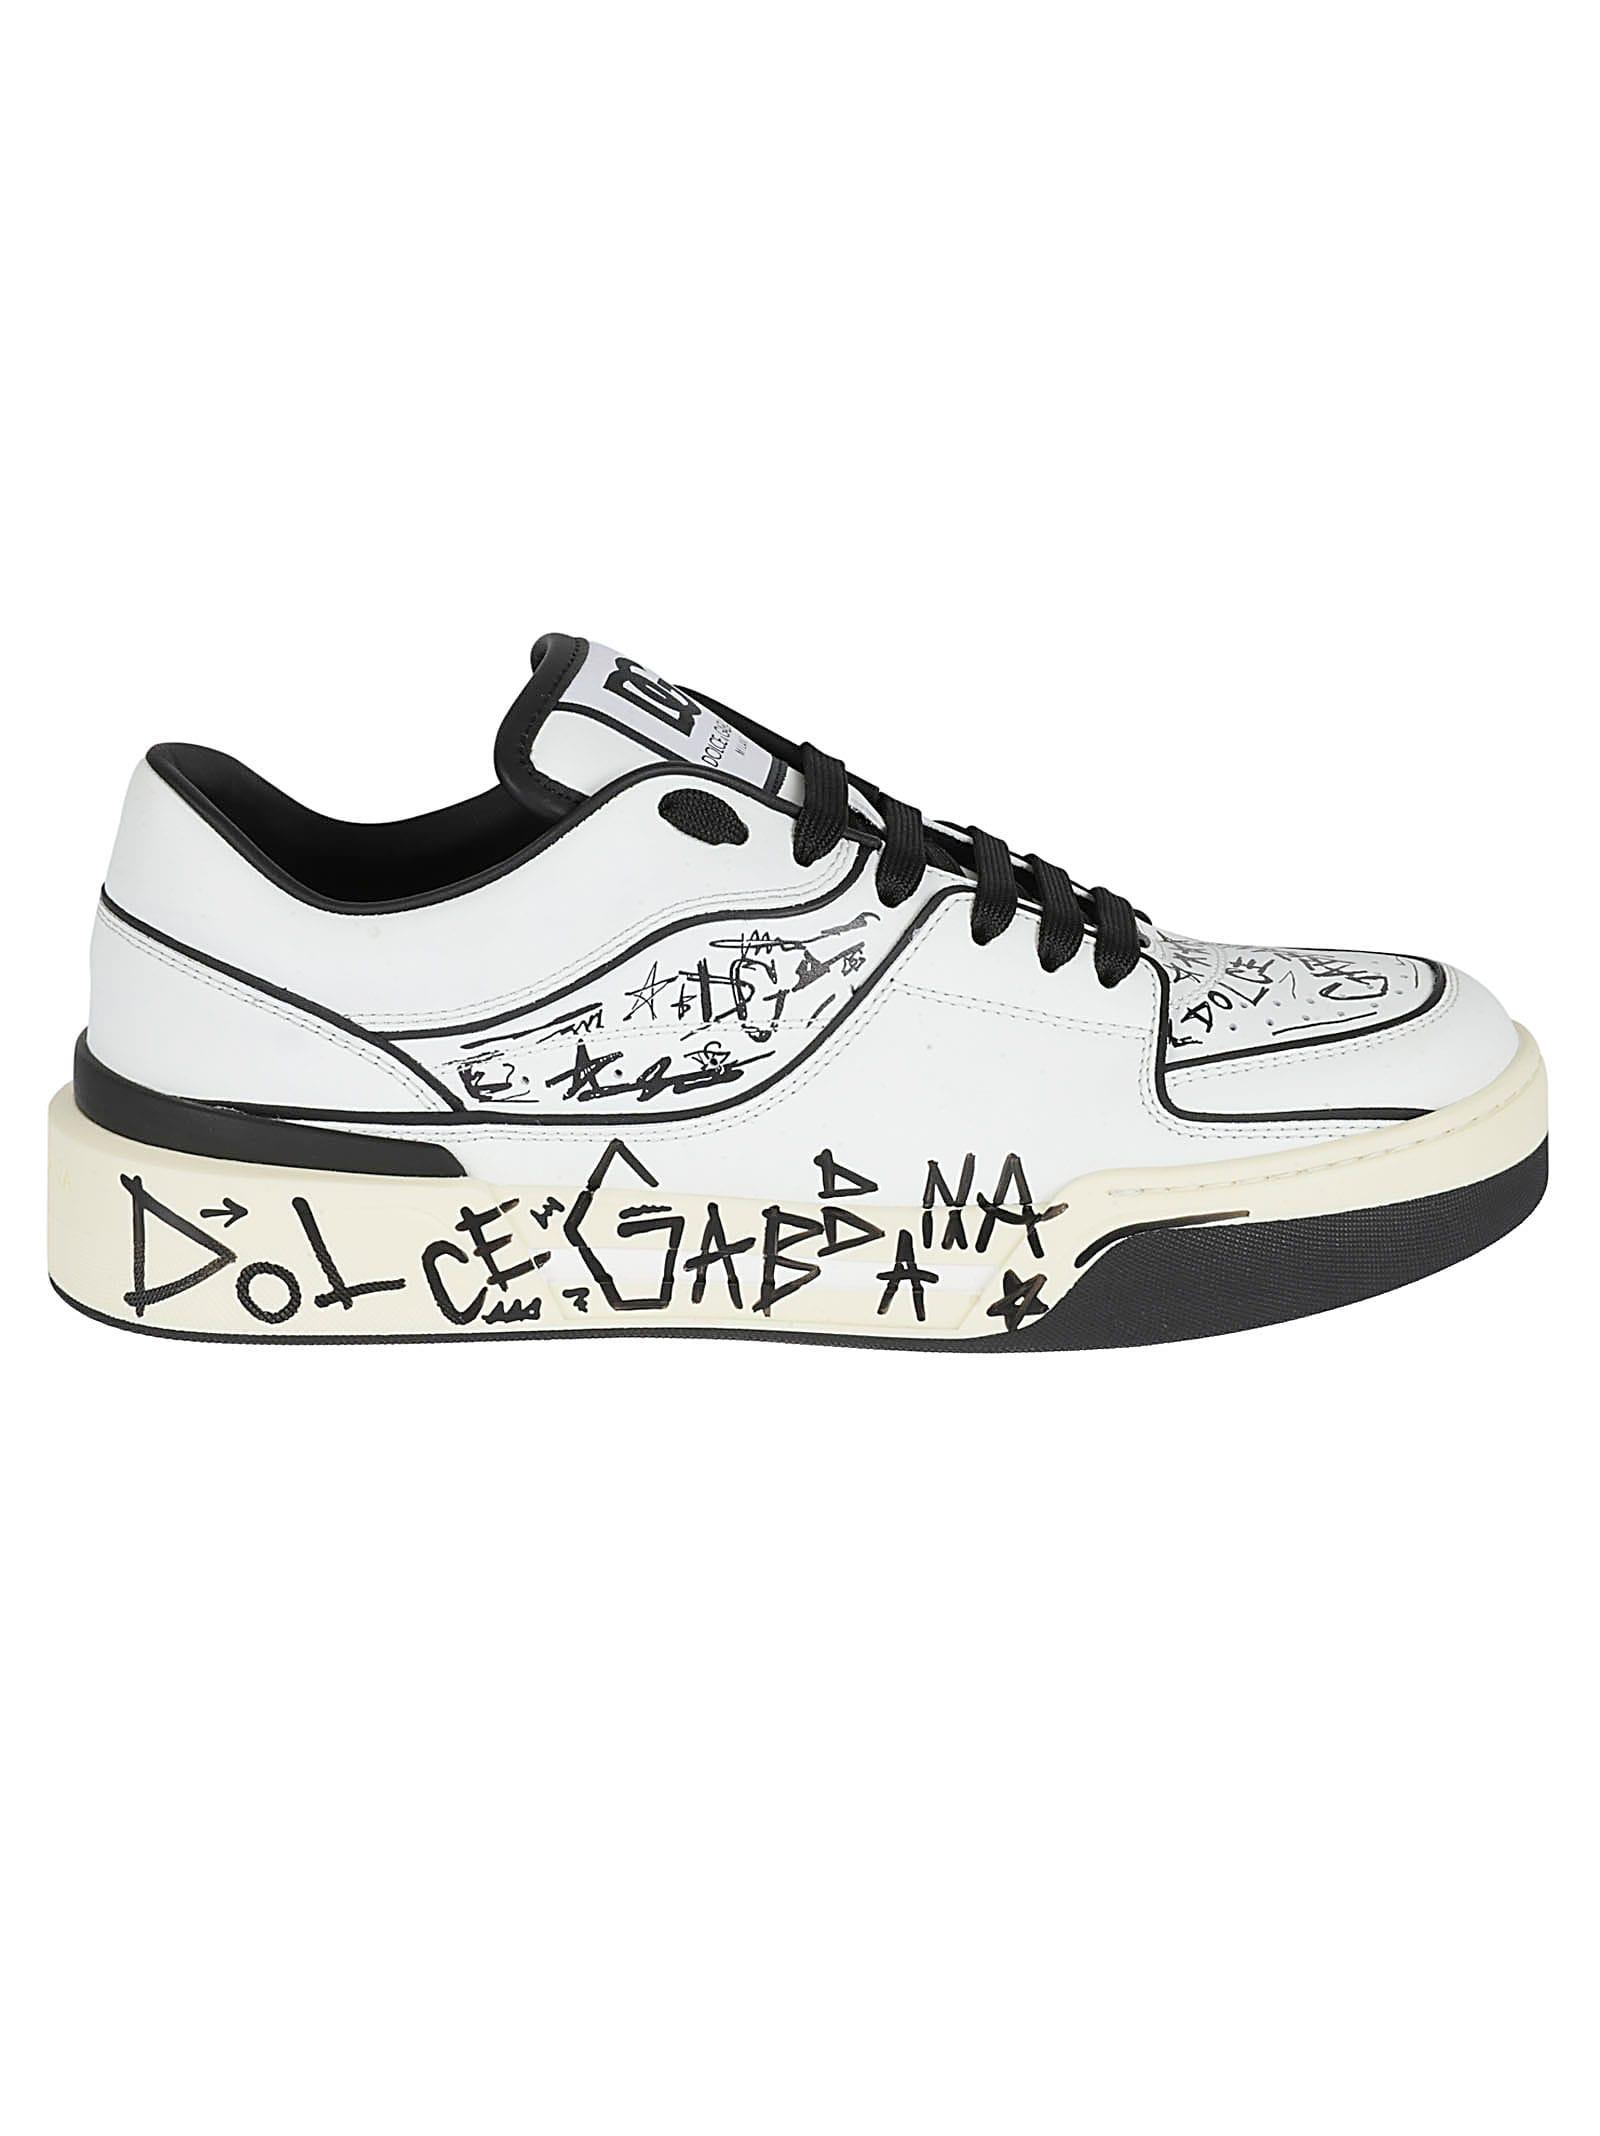 Dolce & Gabbana Logo Patched Graffiti Sneakers for Men | Lyst